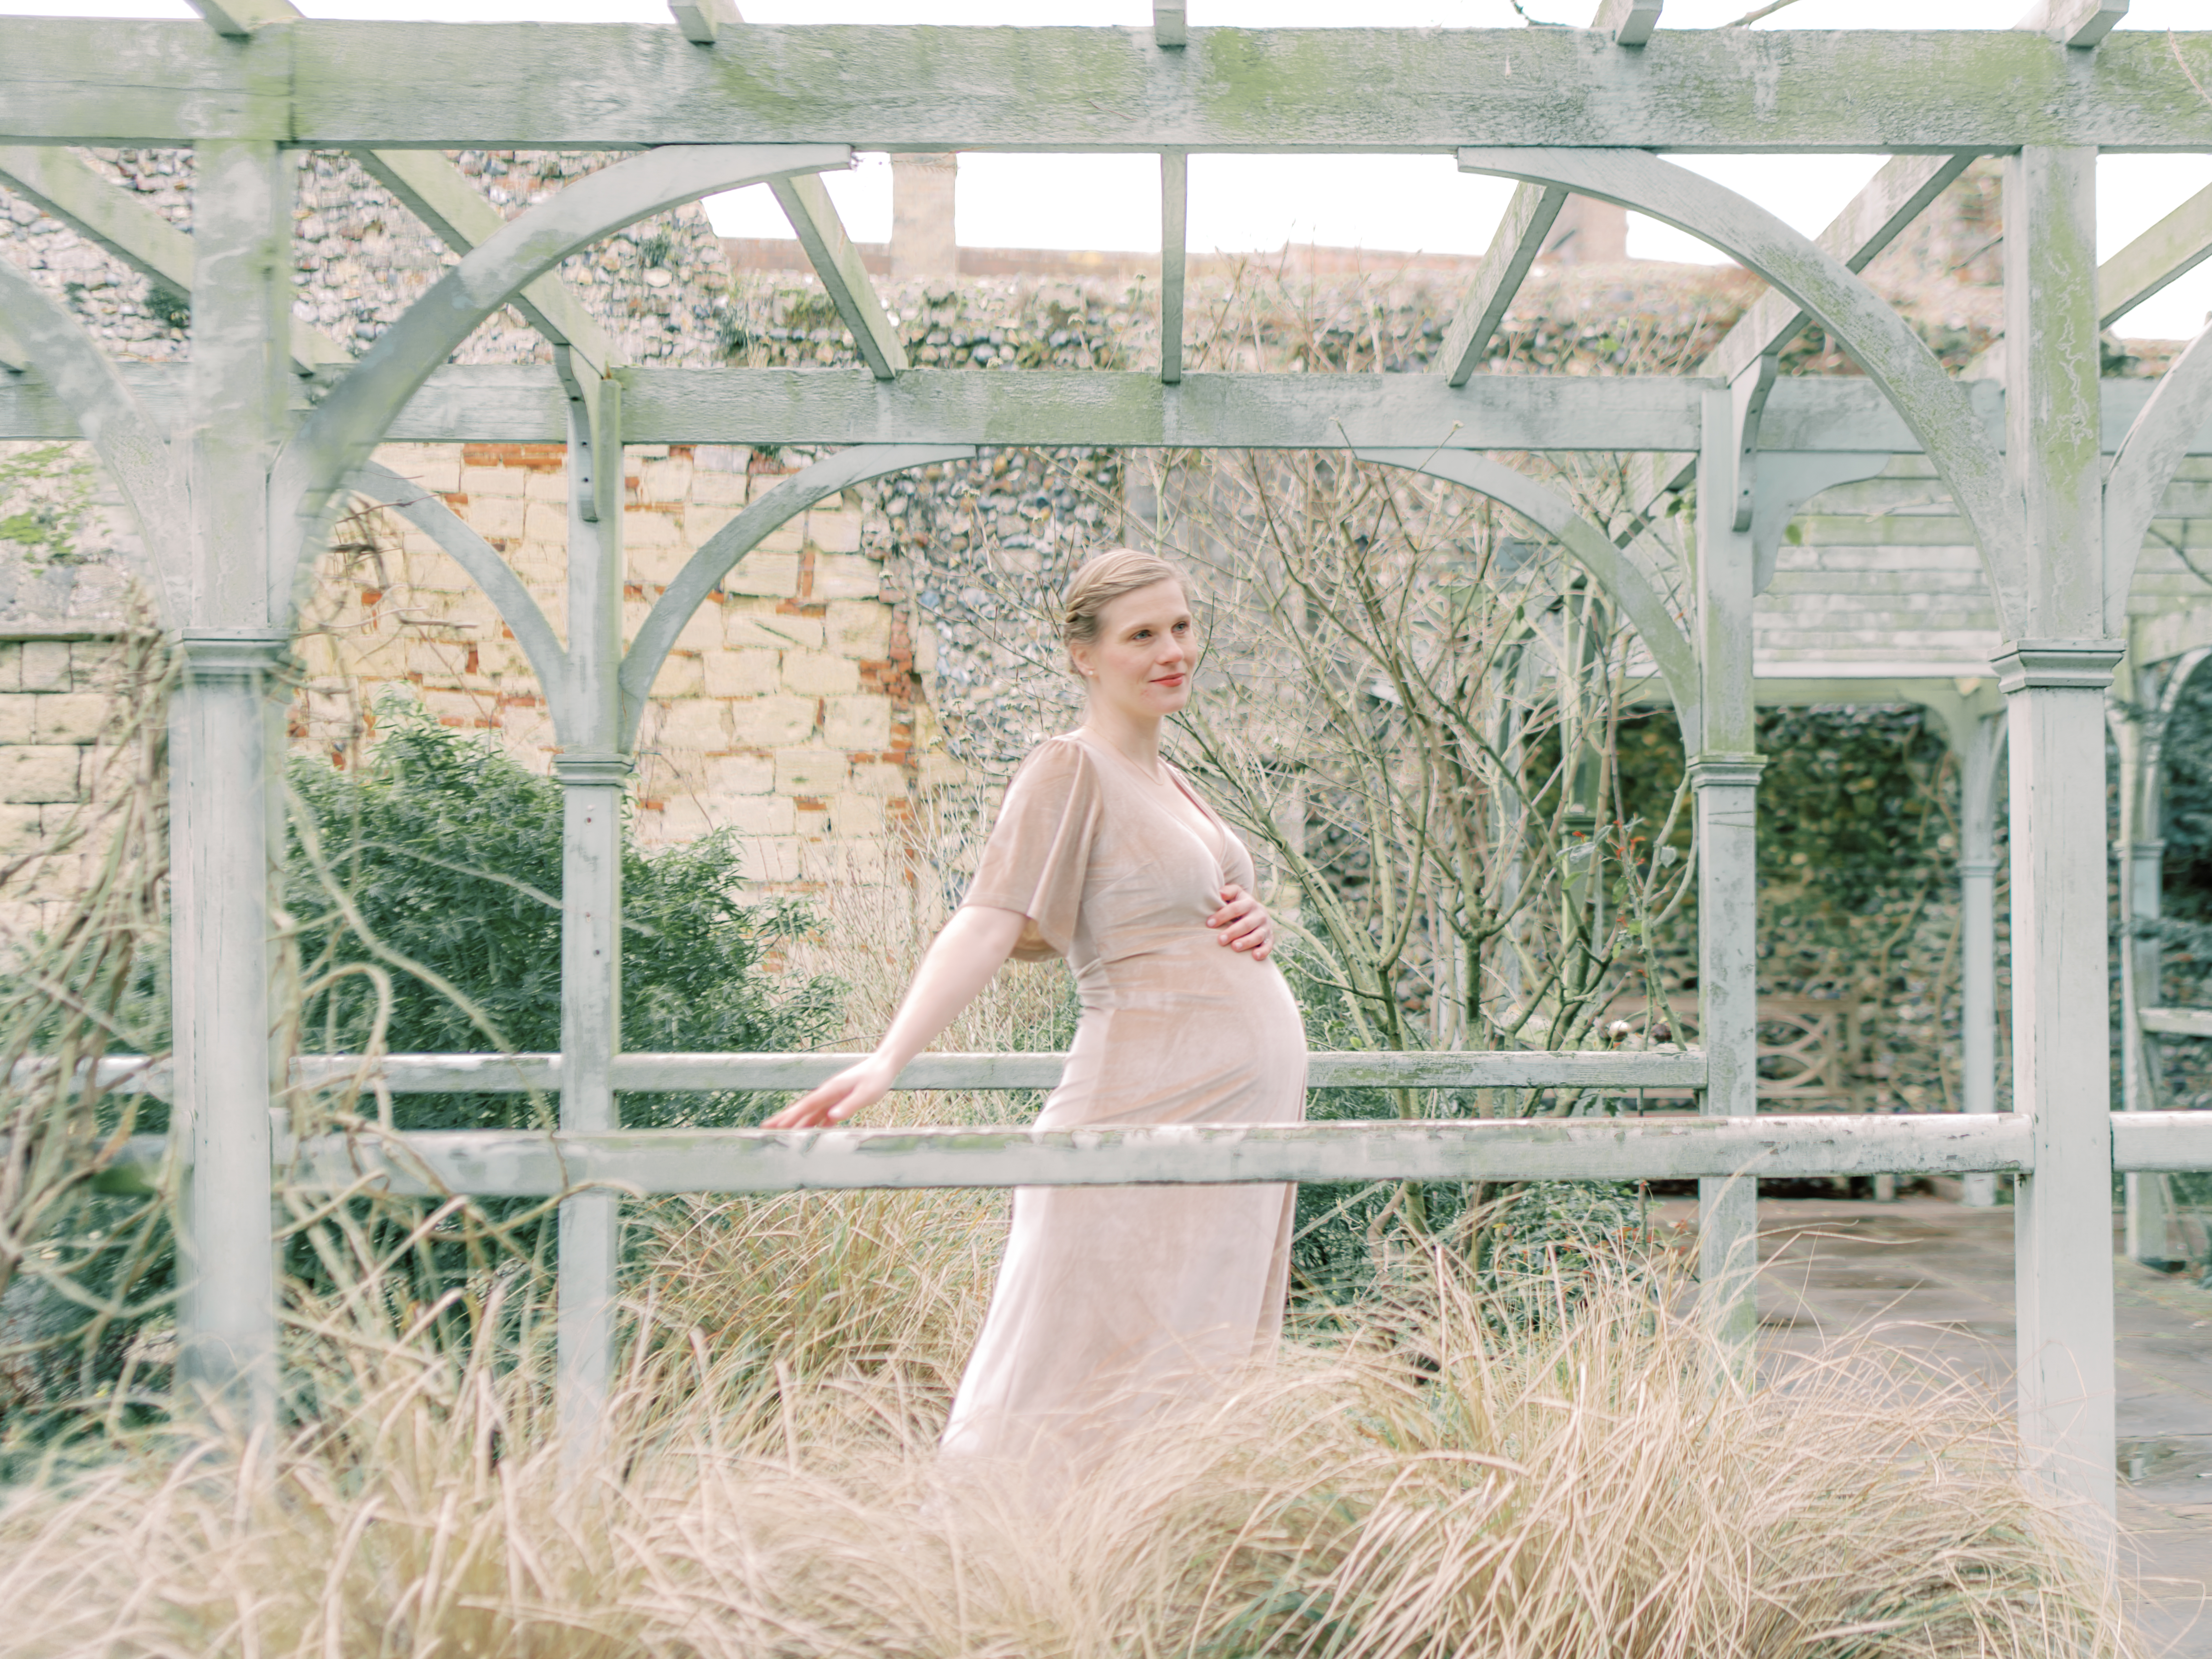 Mother gracefully glides along in enchanting gardens during her professional maternity photo session.